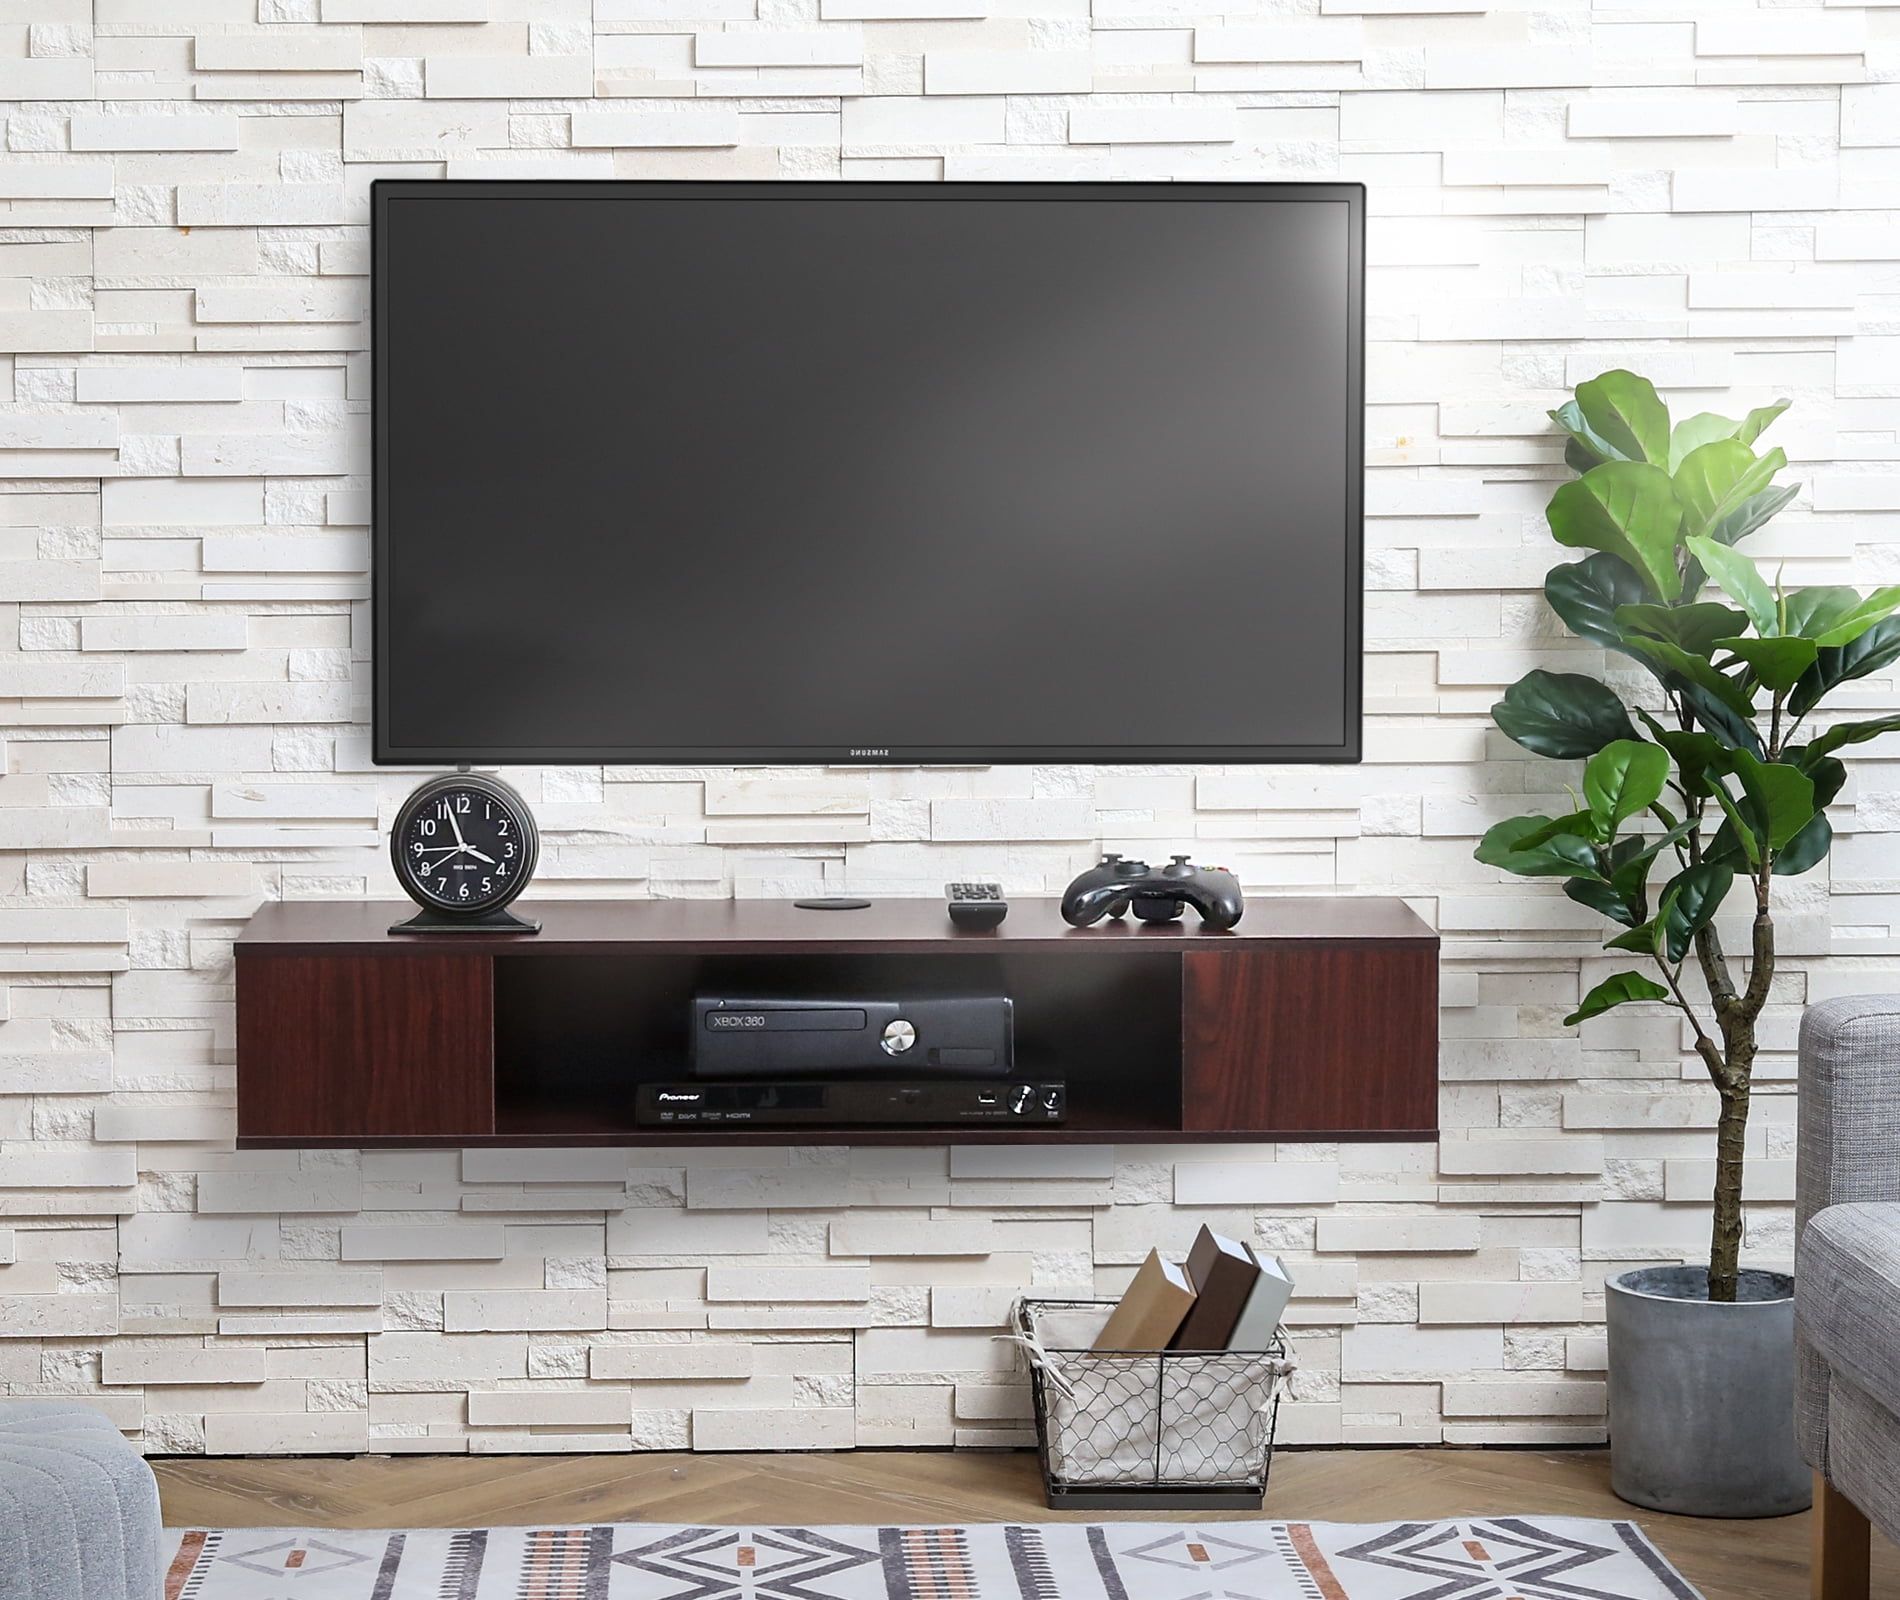 Fitueyes Wall Mounted Media Console,floating Tv Stand Component Shelf Intended For Floating Stands For Tvs (View 4 of 20)